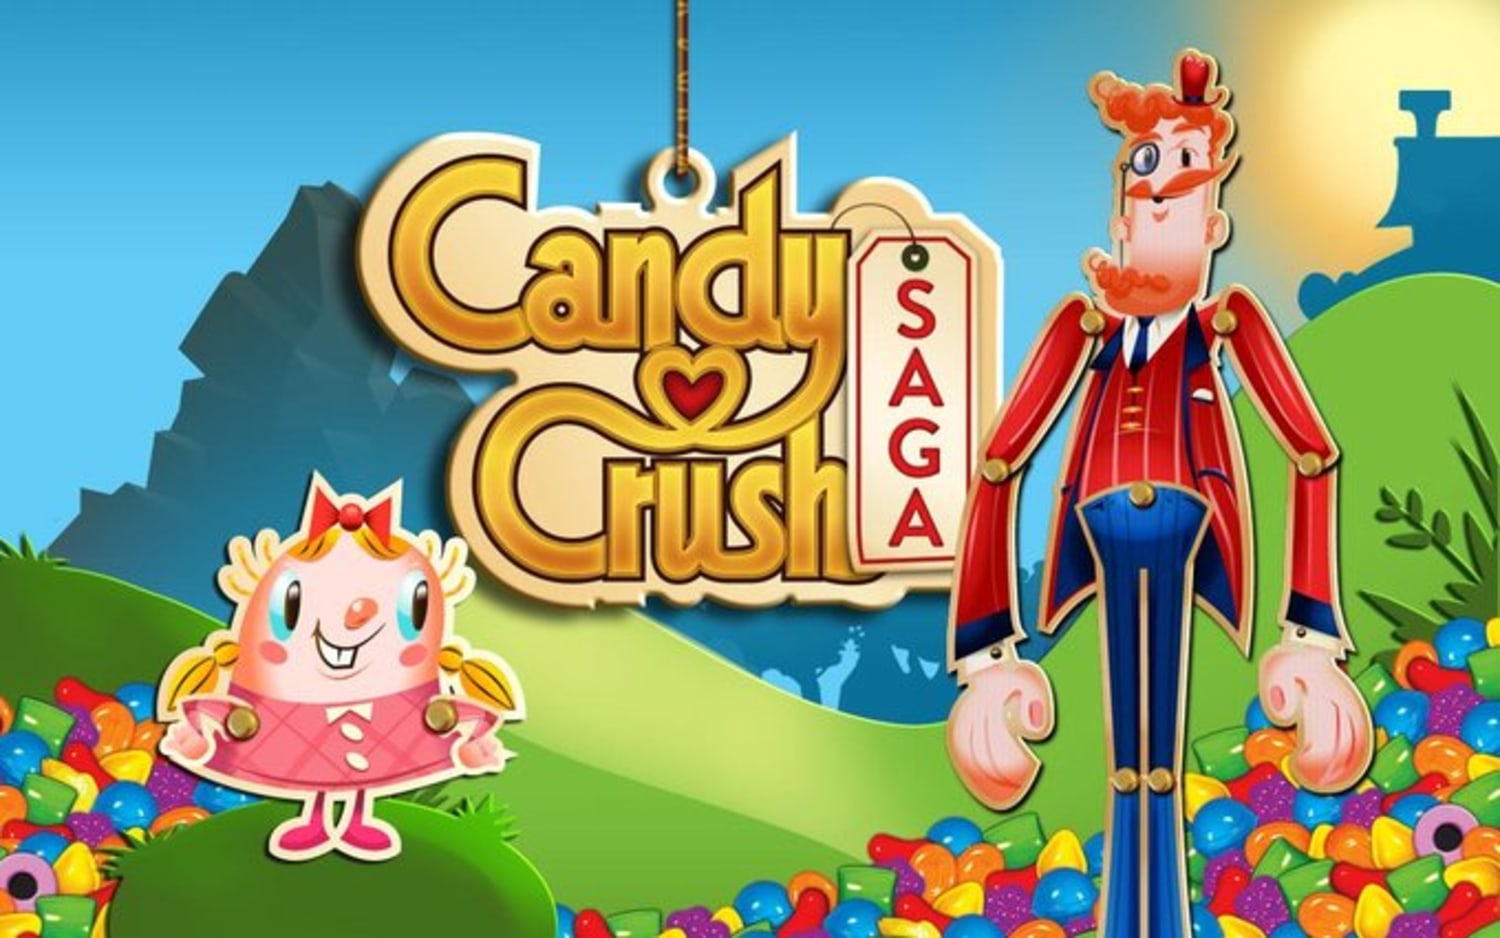 Hooked on Candy Crush 